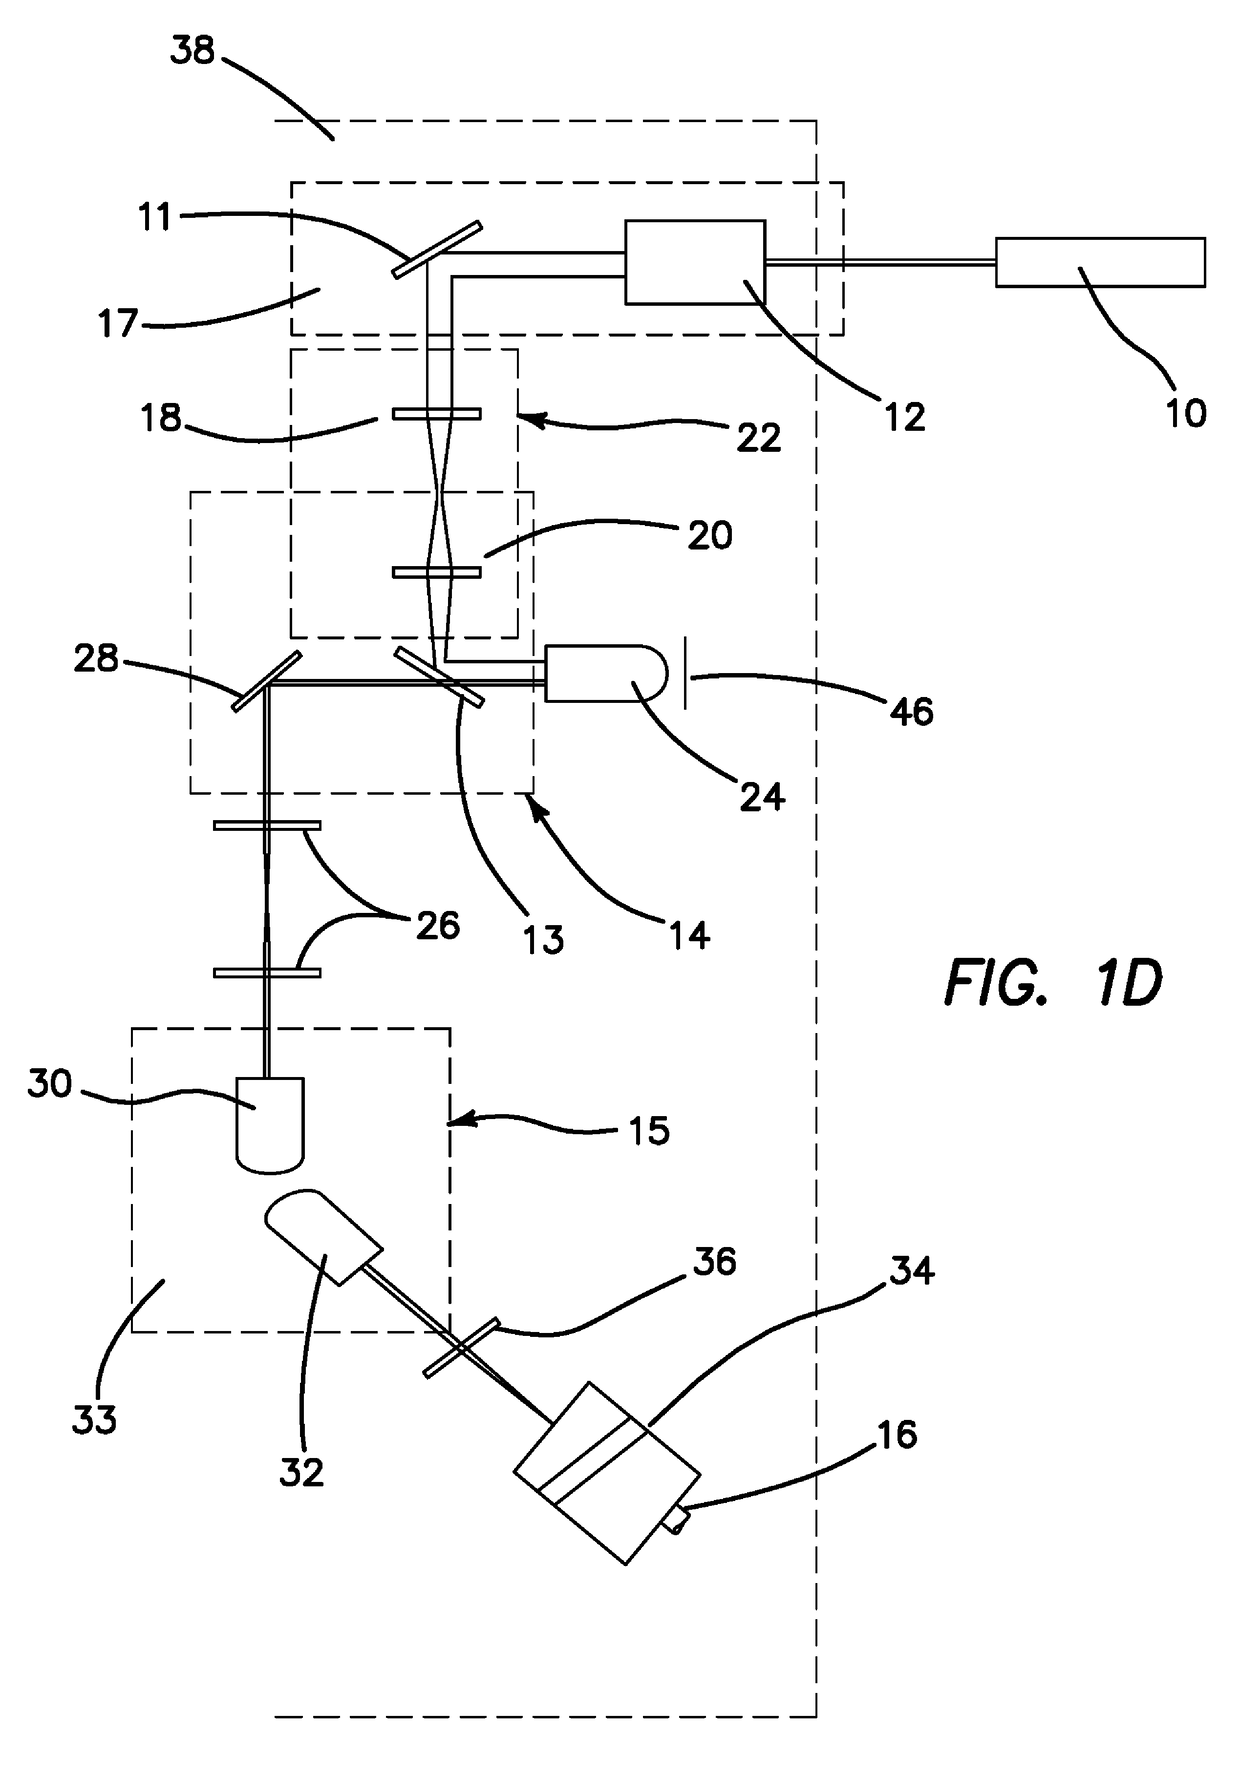 Apparatus and method for an inclined single plane imaging microscope box (iSPIM box)